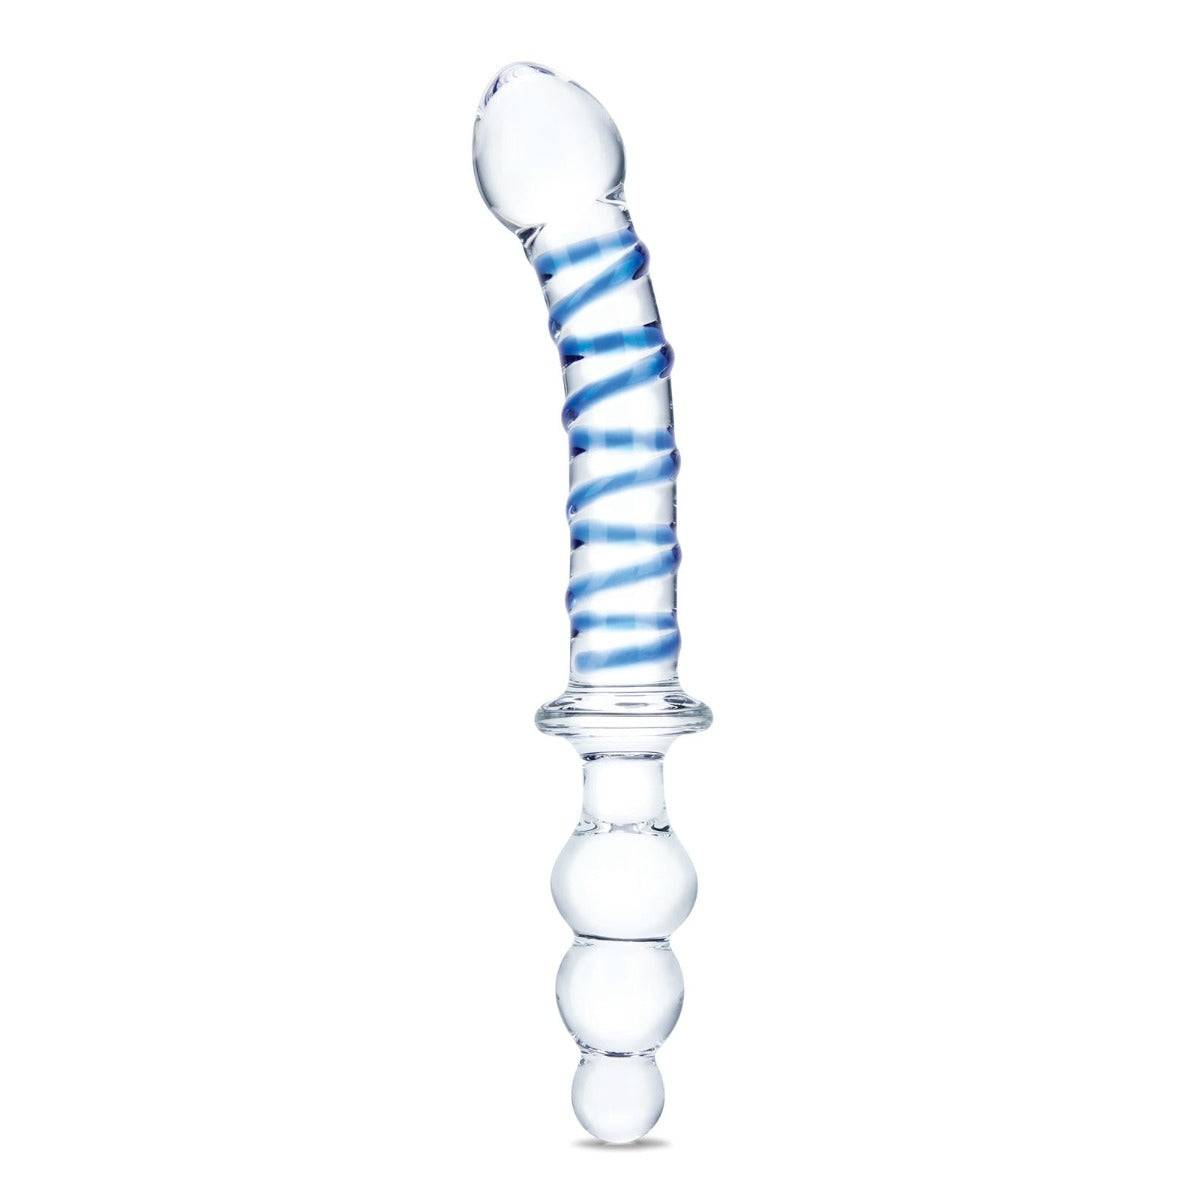 Glas Twister Dual Ended Dildo Clear Blue 10 Inch - Simply Pleasure